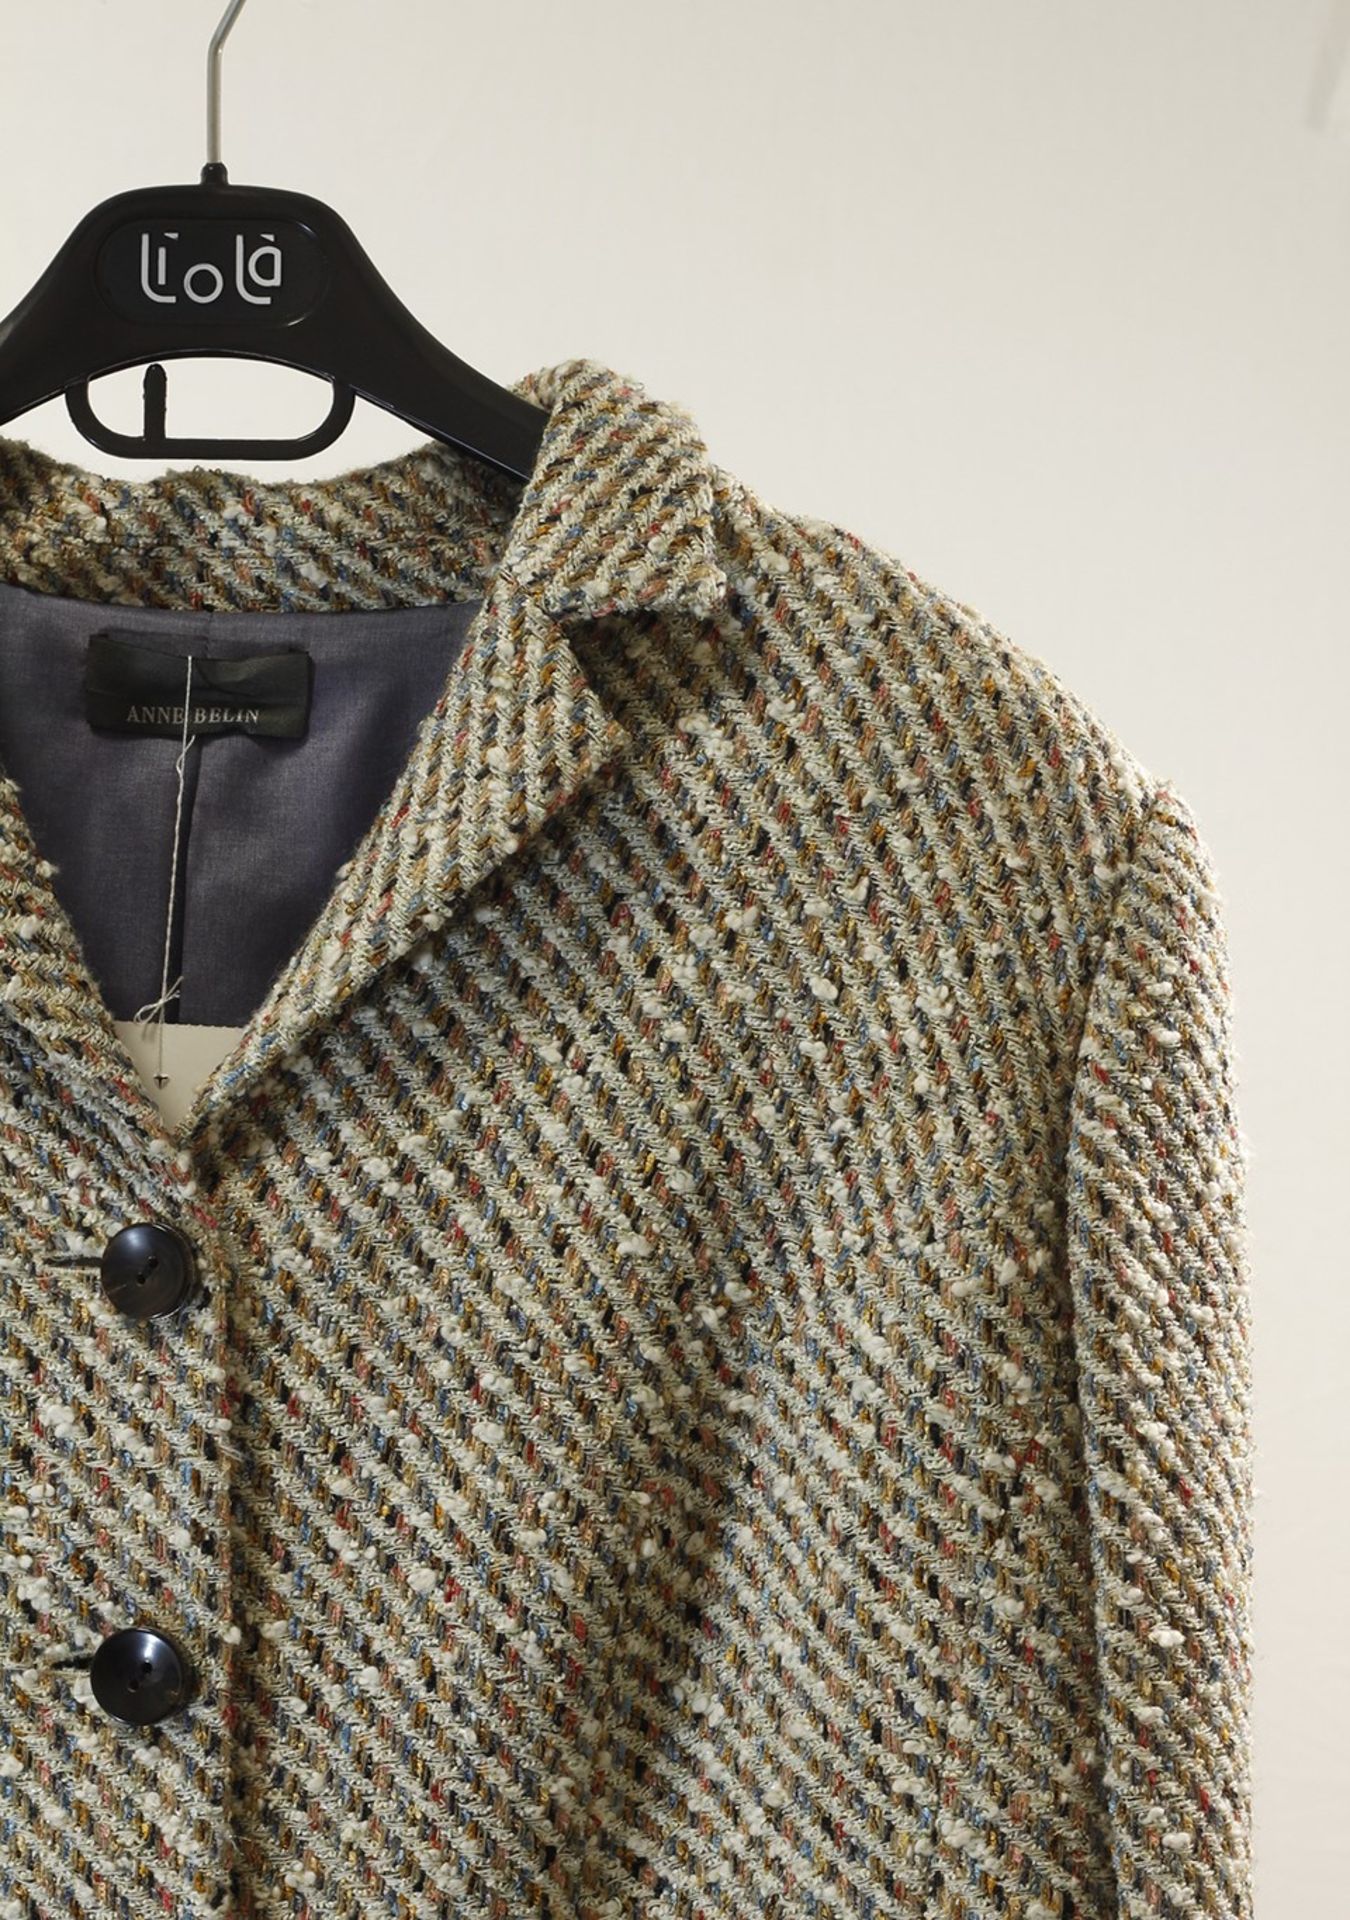 1 x Anne Belin Multicolour Tweed Jacket - Size: 24 - Material: 50% Polyacrylic, 25% Viscose, 25% - Image 6 of 6